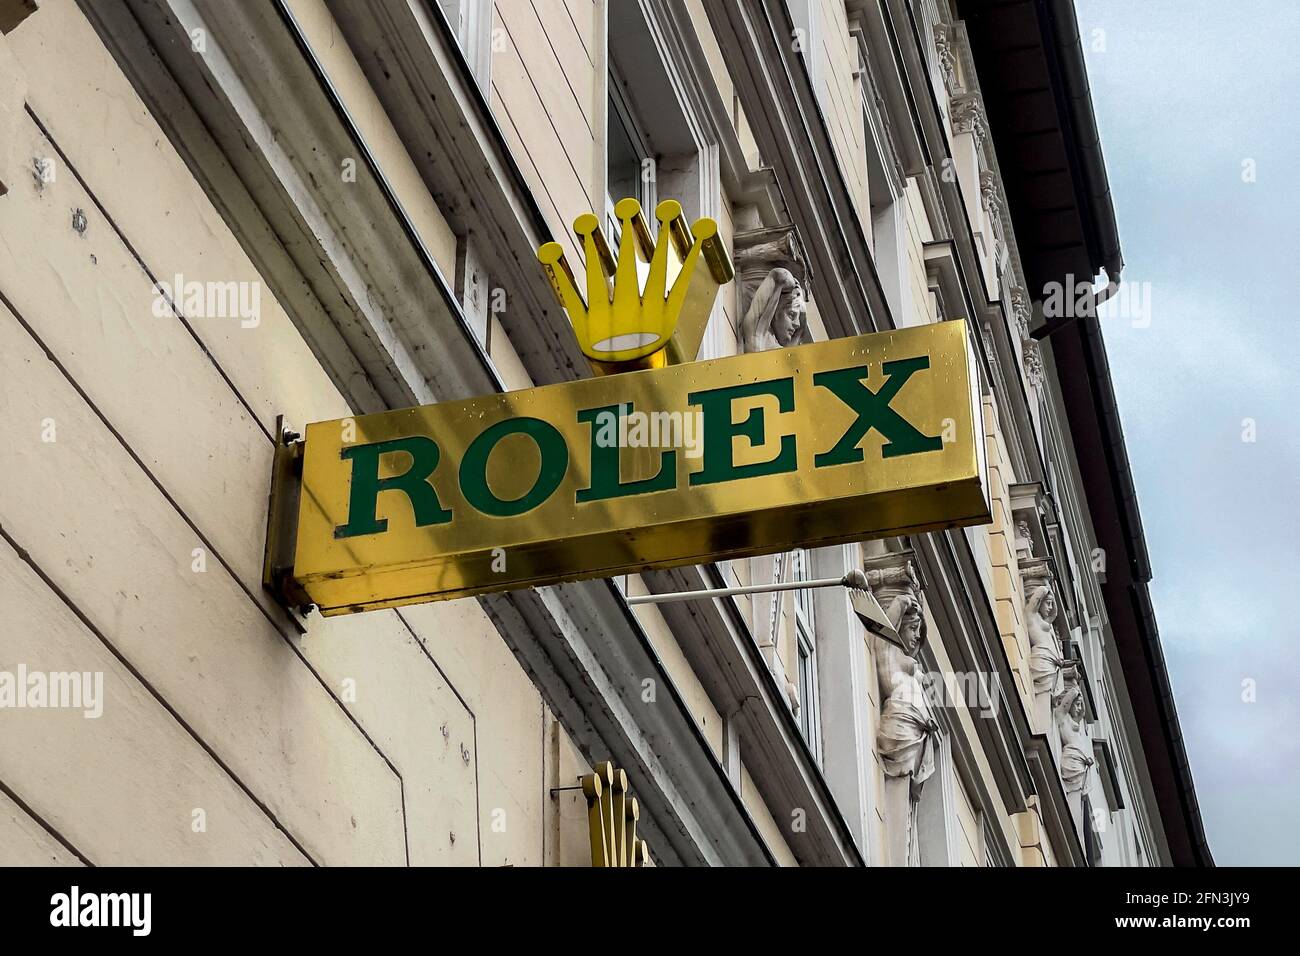 Rolex store sign in Munich town center Stock Photo - Alamy